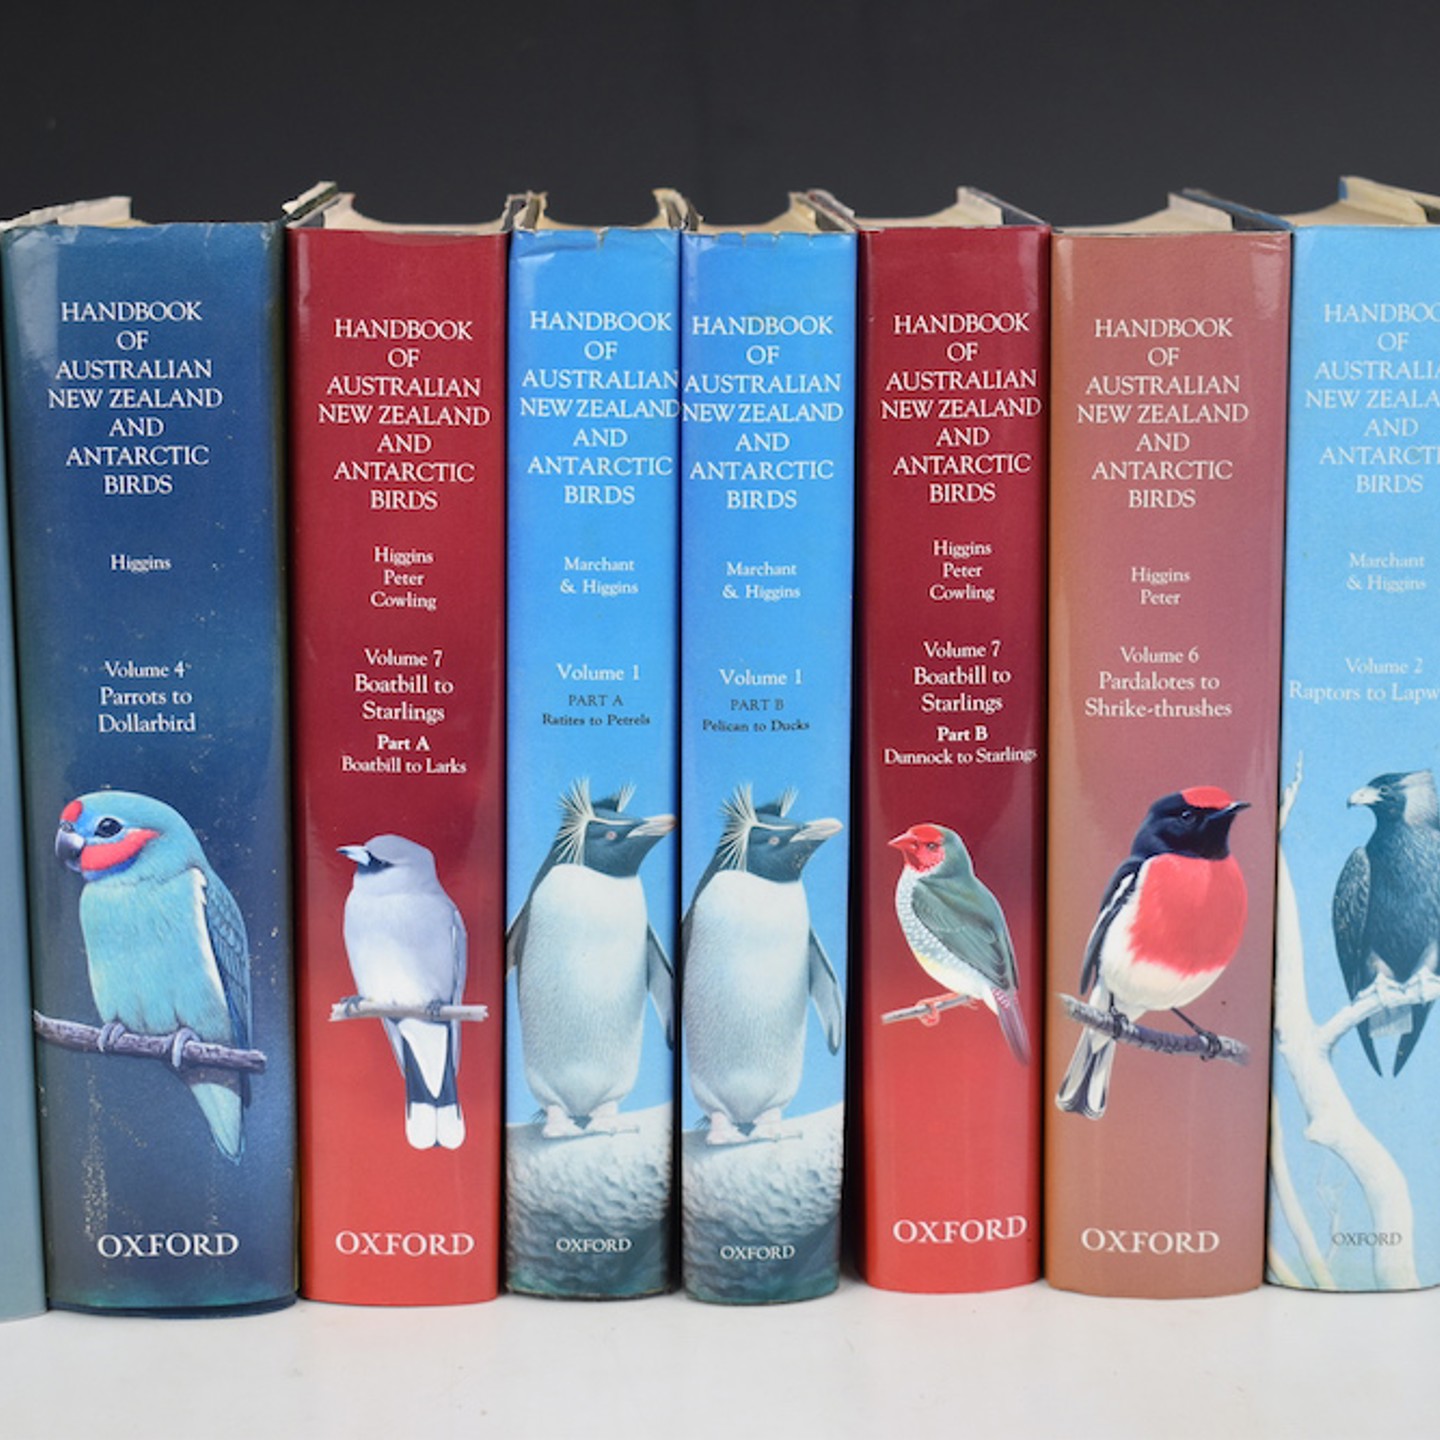 Handbook Of Australian, New Zealand & Antarctic Birds S. Marchant And P.J. Higgins & Others (Co Ordinators) Published OUP 1990 2006 First Edition In 7 Volumes (Bound In 9) HAMMER £1100